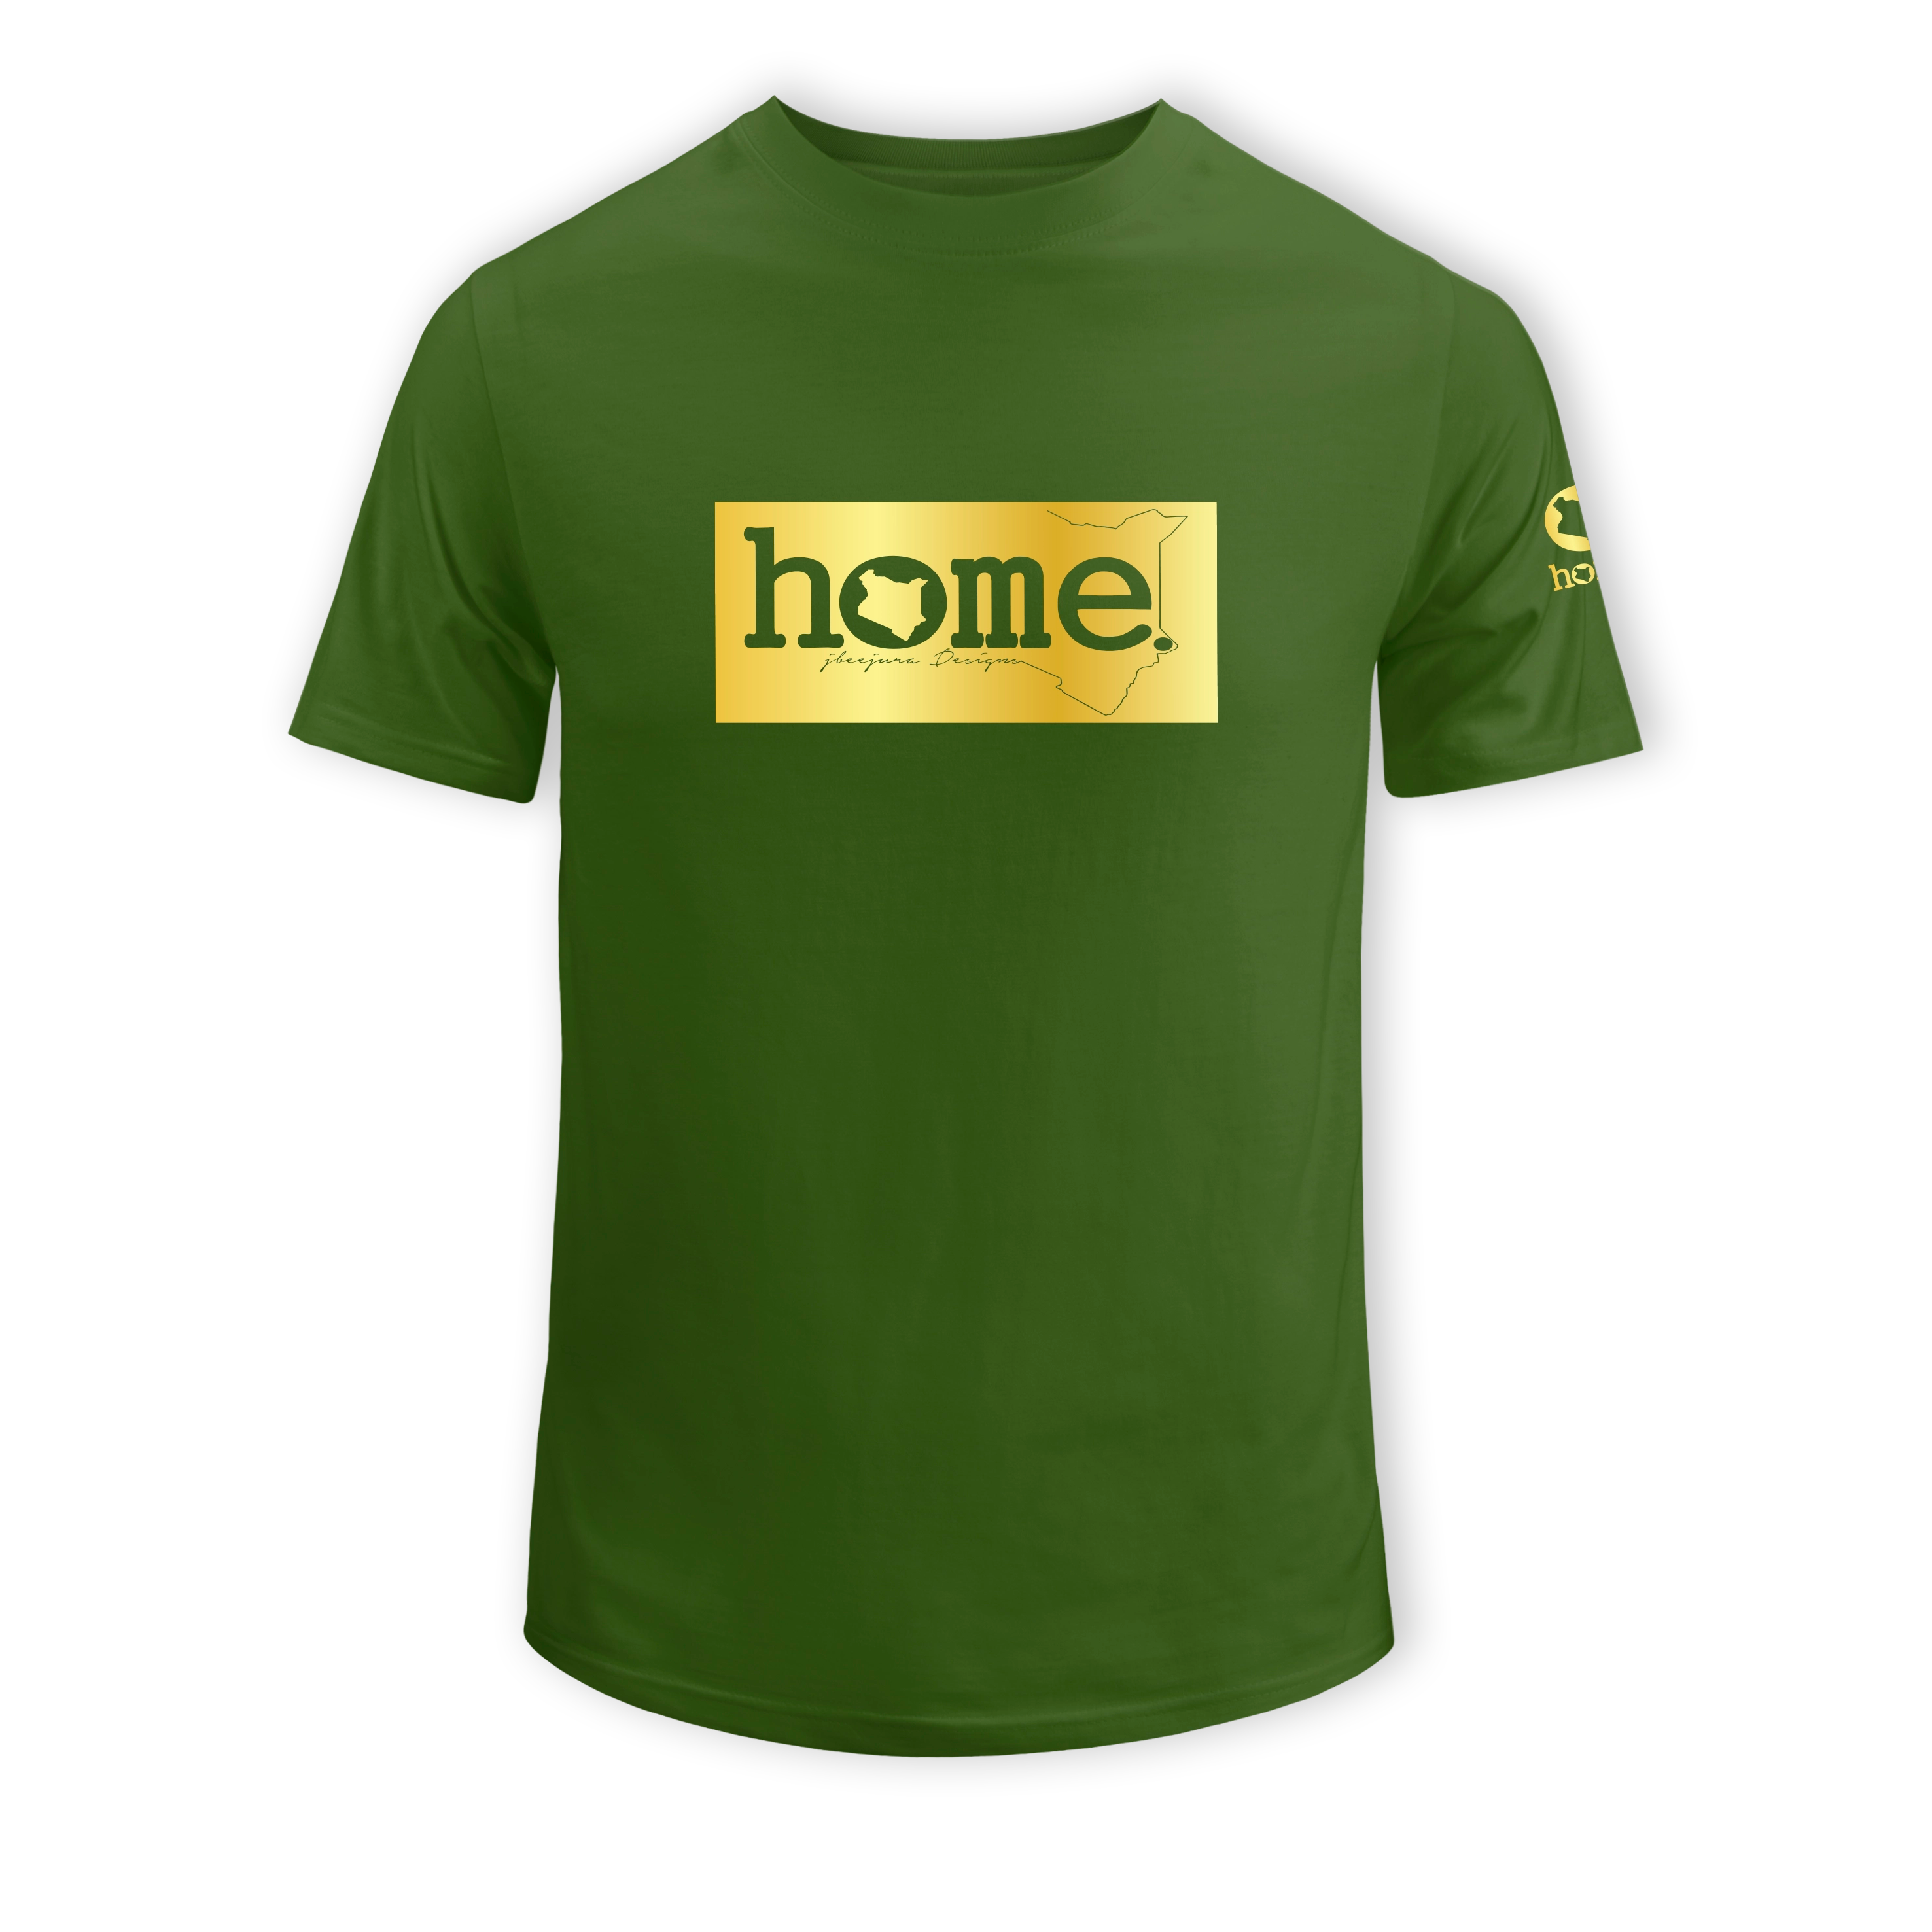 home_254 KIDS SHORT-SLEEVED JUNGLE GREEN T-SHIRT WITH A GOLD CLASSIC PRINT – COTTON PLUS FABRIC